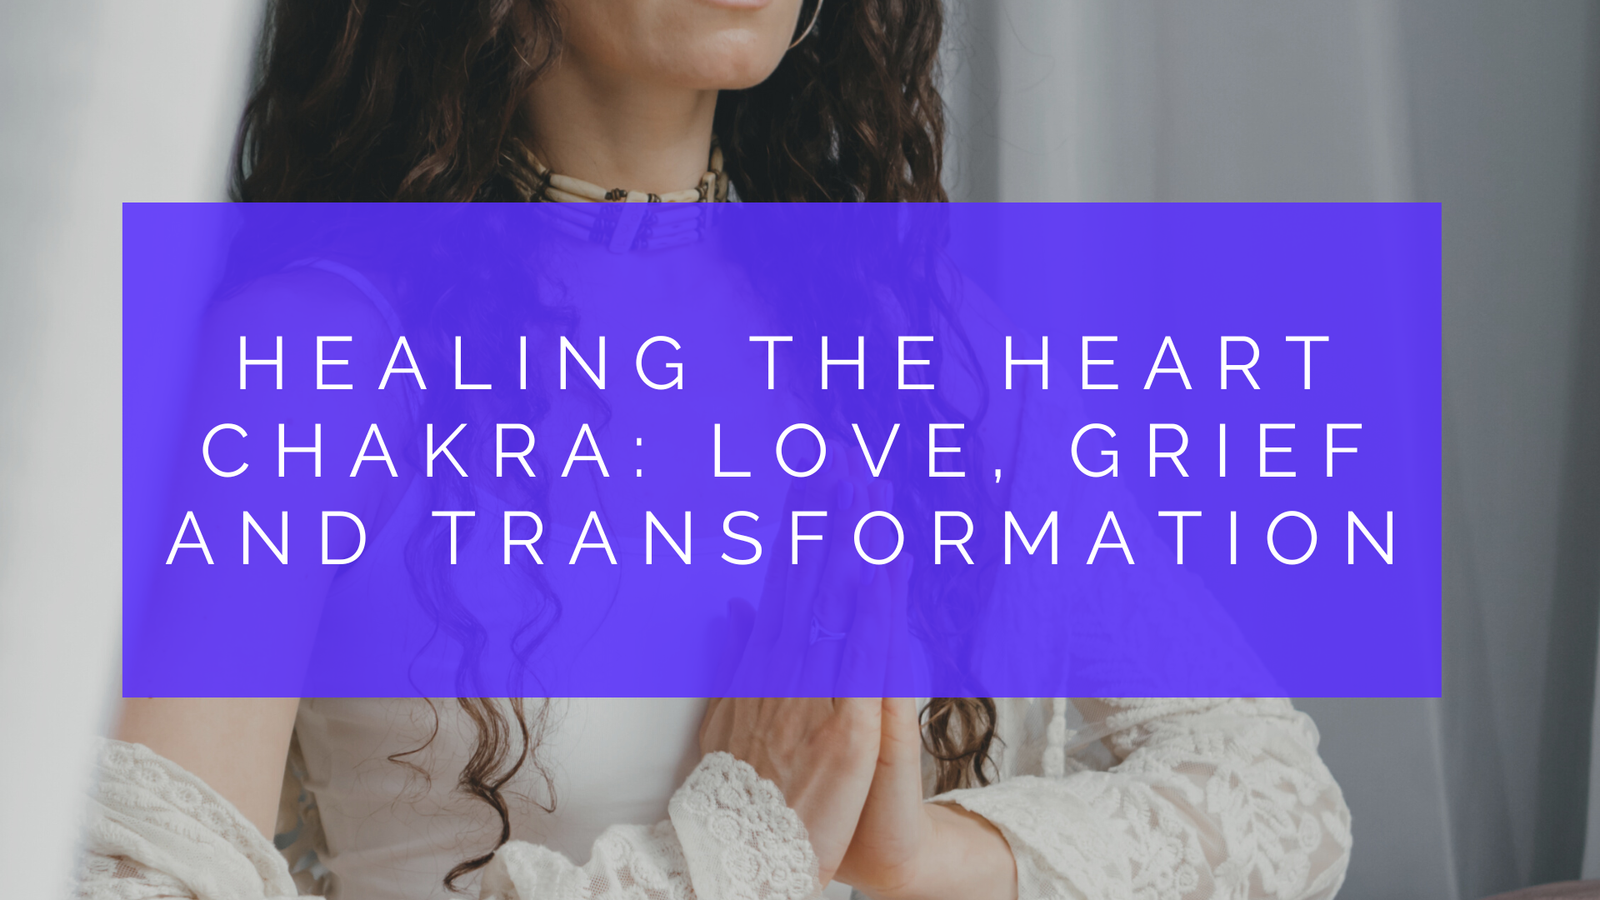 Healing the Heart Chakra: Love, Grief and Transformation